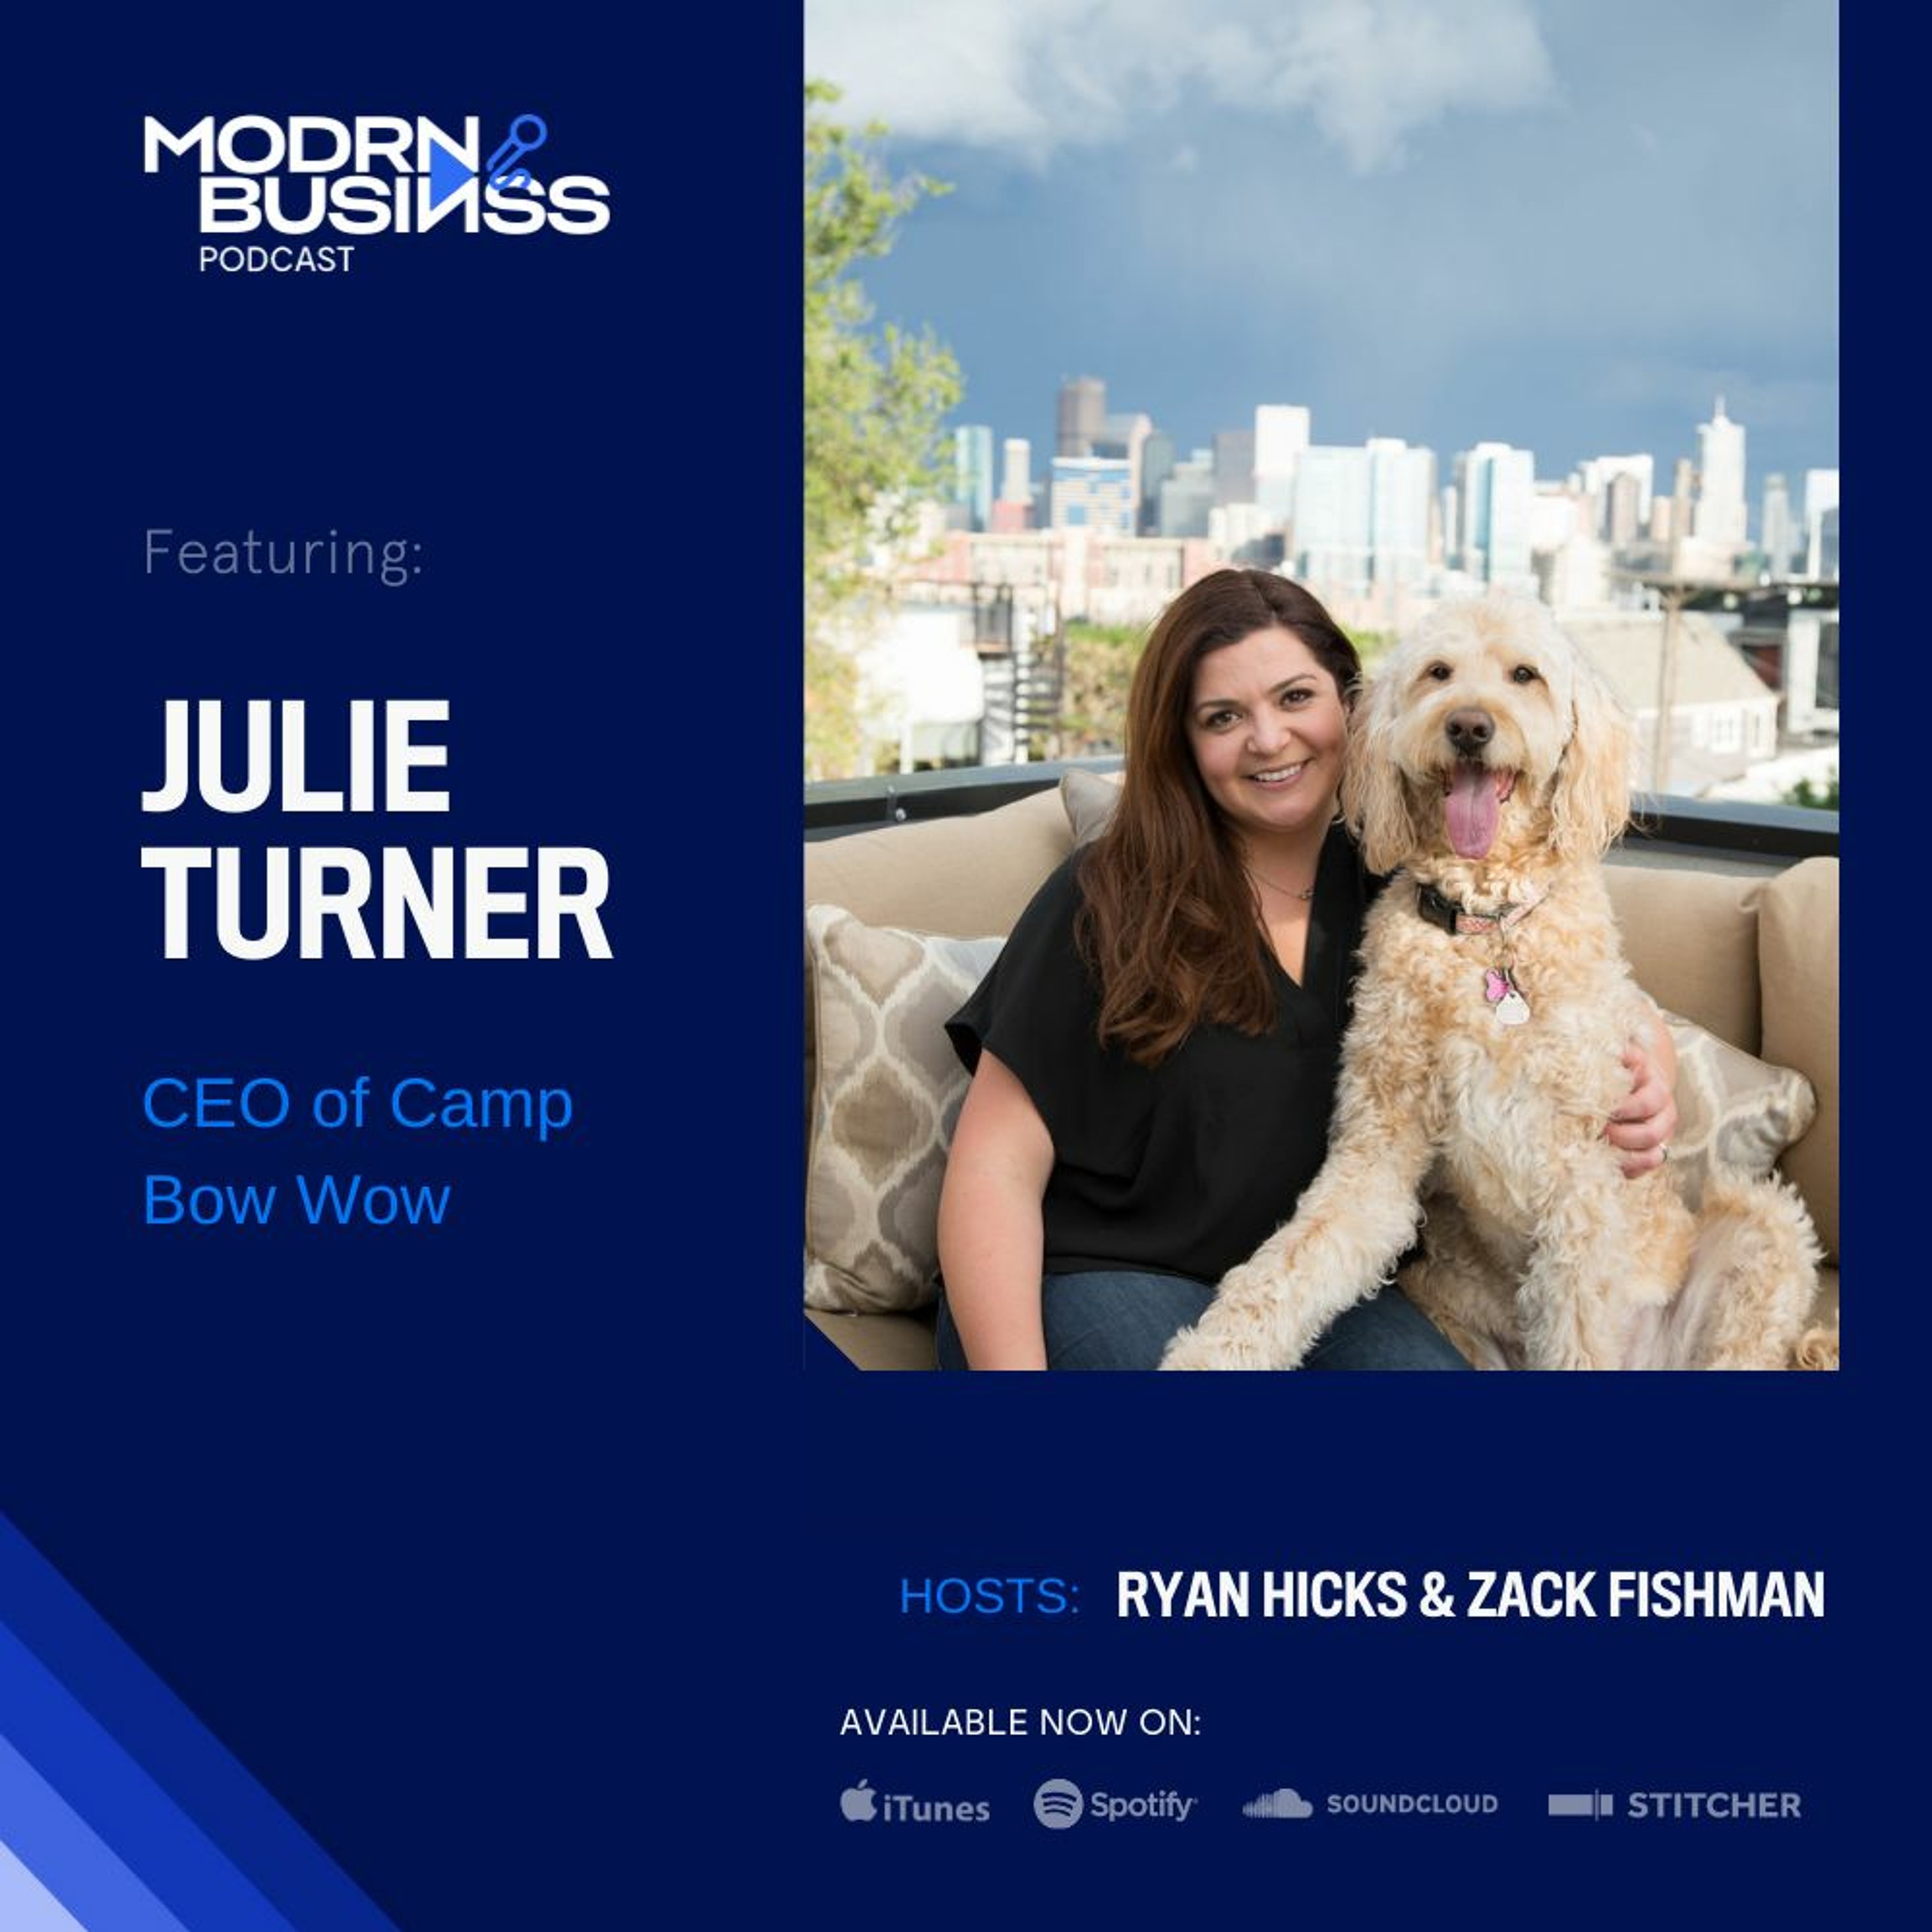 Camp Bow Wow CEO Julie Turner